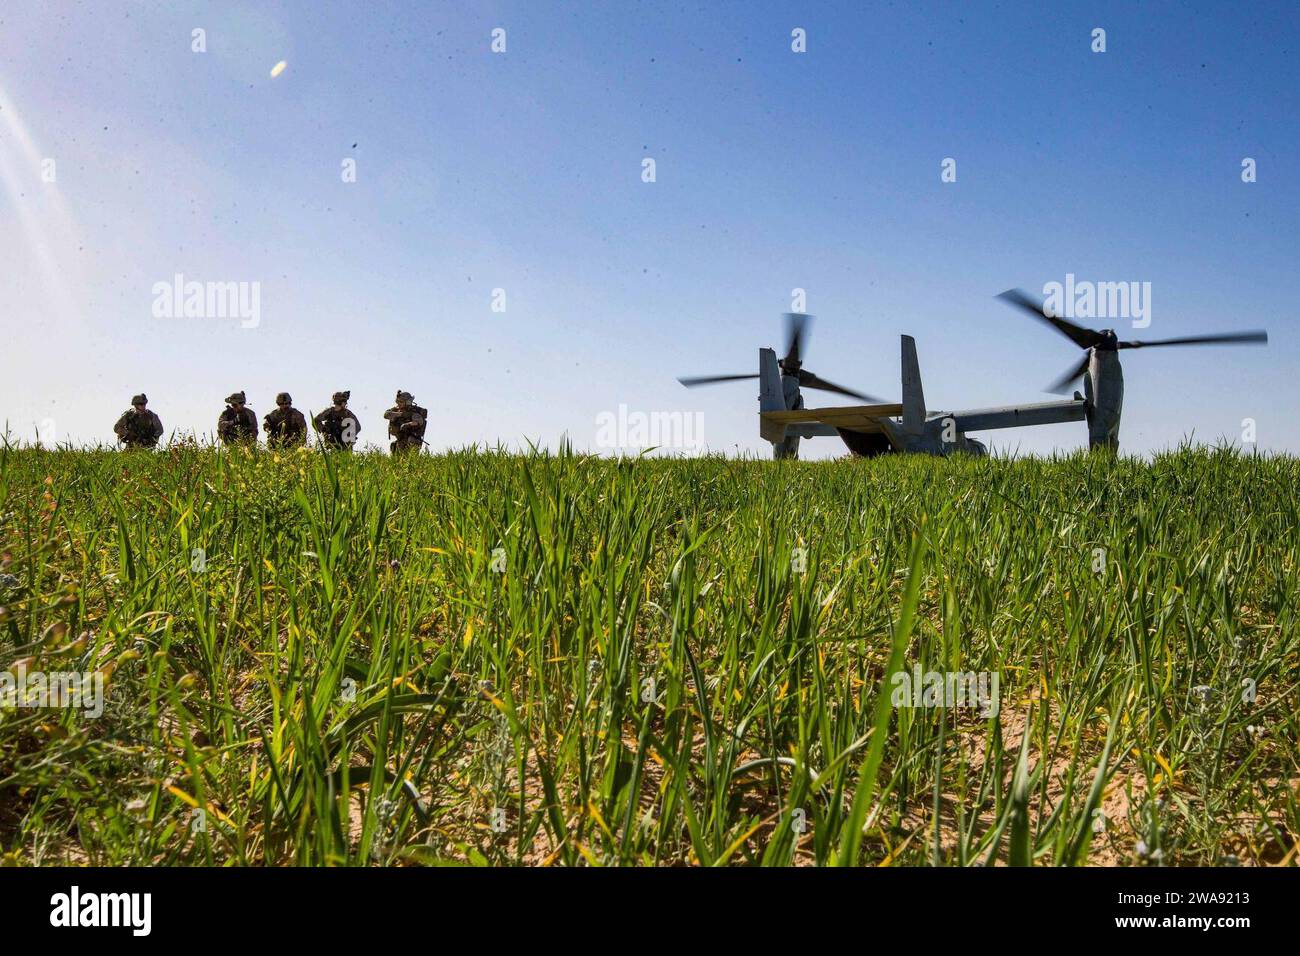 US military forces. 20180314-CA957-0007 HAIFA, Israel (March 14, 2018) U.S. Marines assigned to the Tactical Recovery of Aircraft Personnel (TRAP) team, 26th Marine Expeditionary Unit (MEU), arrive in a landing zone of an MV-22B Osprey aircraft to conduct a simulated search mission in Haifa, Israel, during exercise Juniper Cobra 2018 March 14, 2018. Juniper Cobra is a computer-assisted exercise conducted through computer simulations focused on improving combined missile defense capabilities and overall interoperability between the U.S. European Command and Israel Defense Force.(U.S. Marine Cor Stock Photo